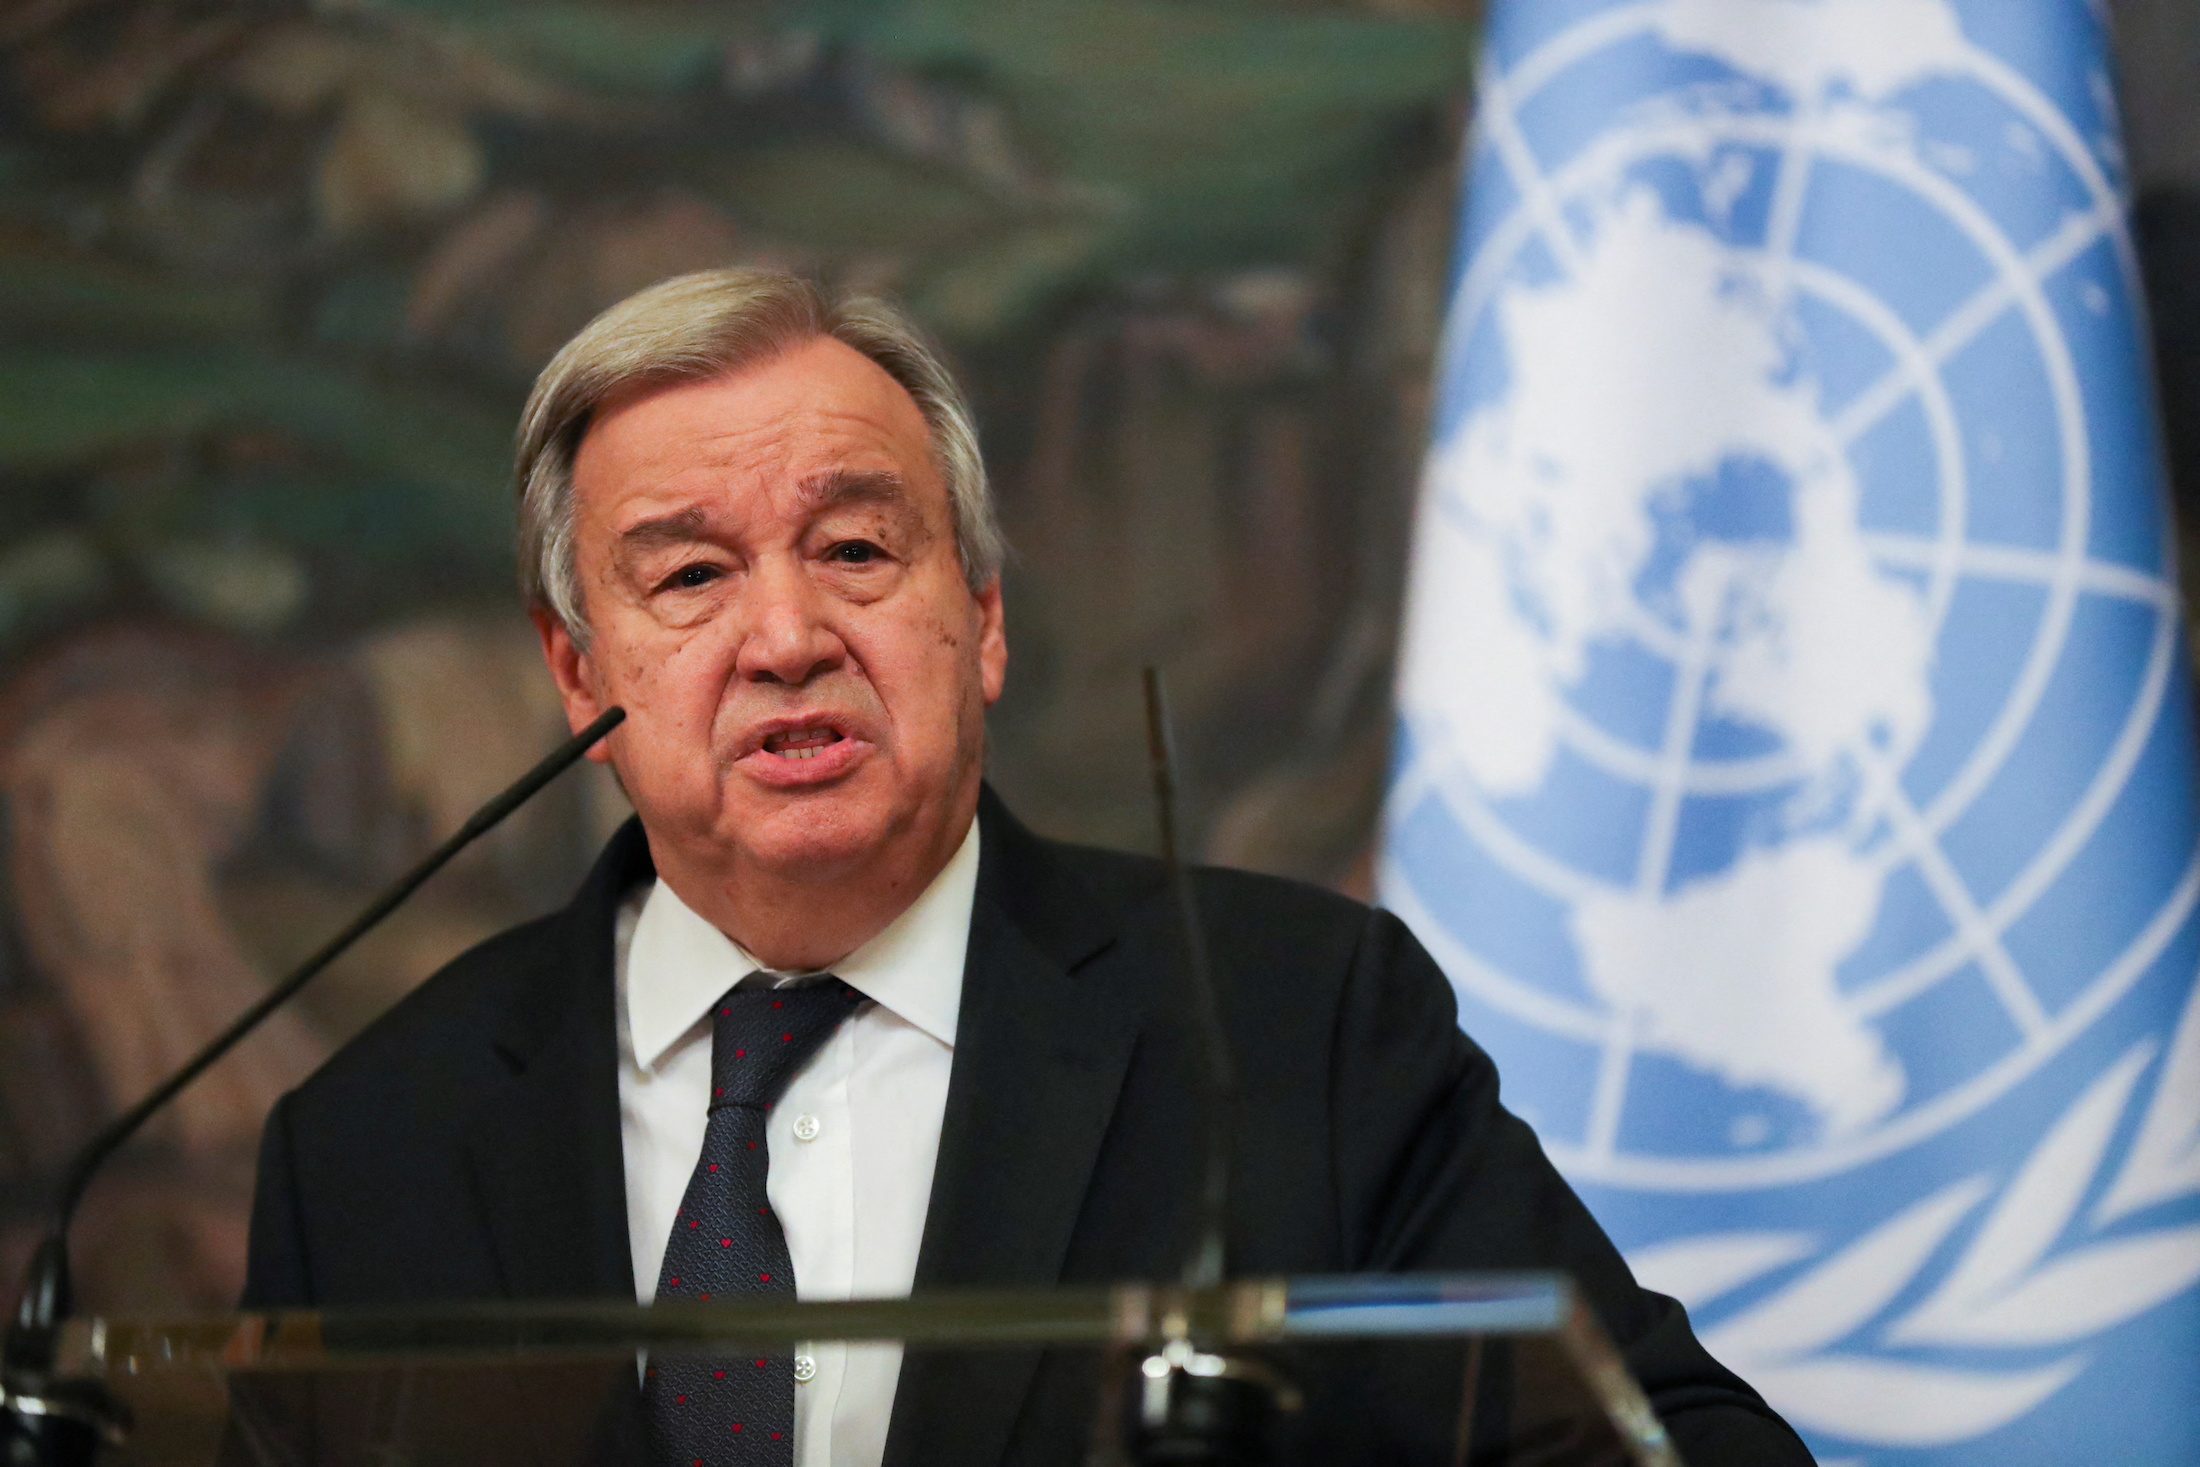 UN chief tells Russia it wants to coordinate efforts to save lives in Mariupol